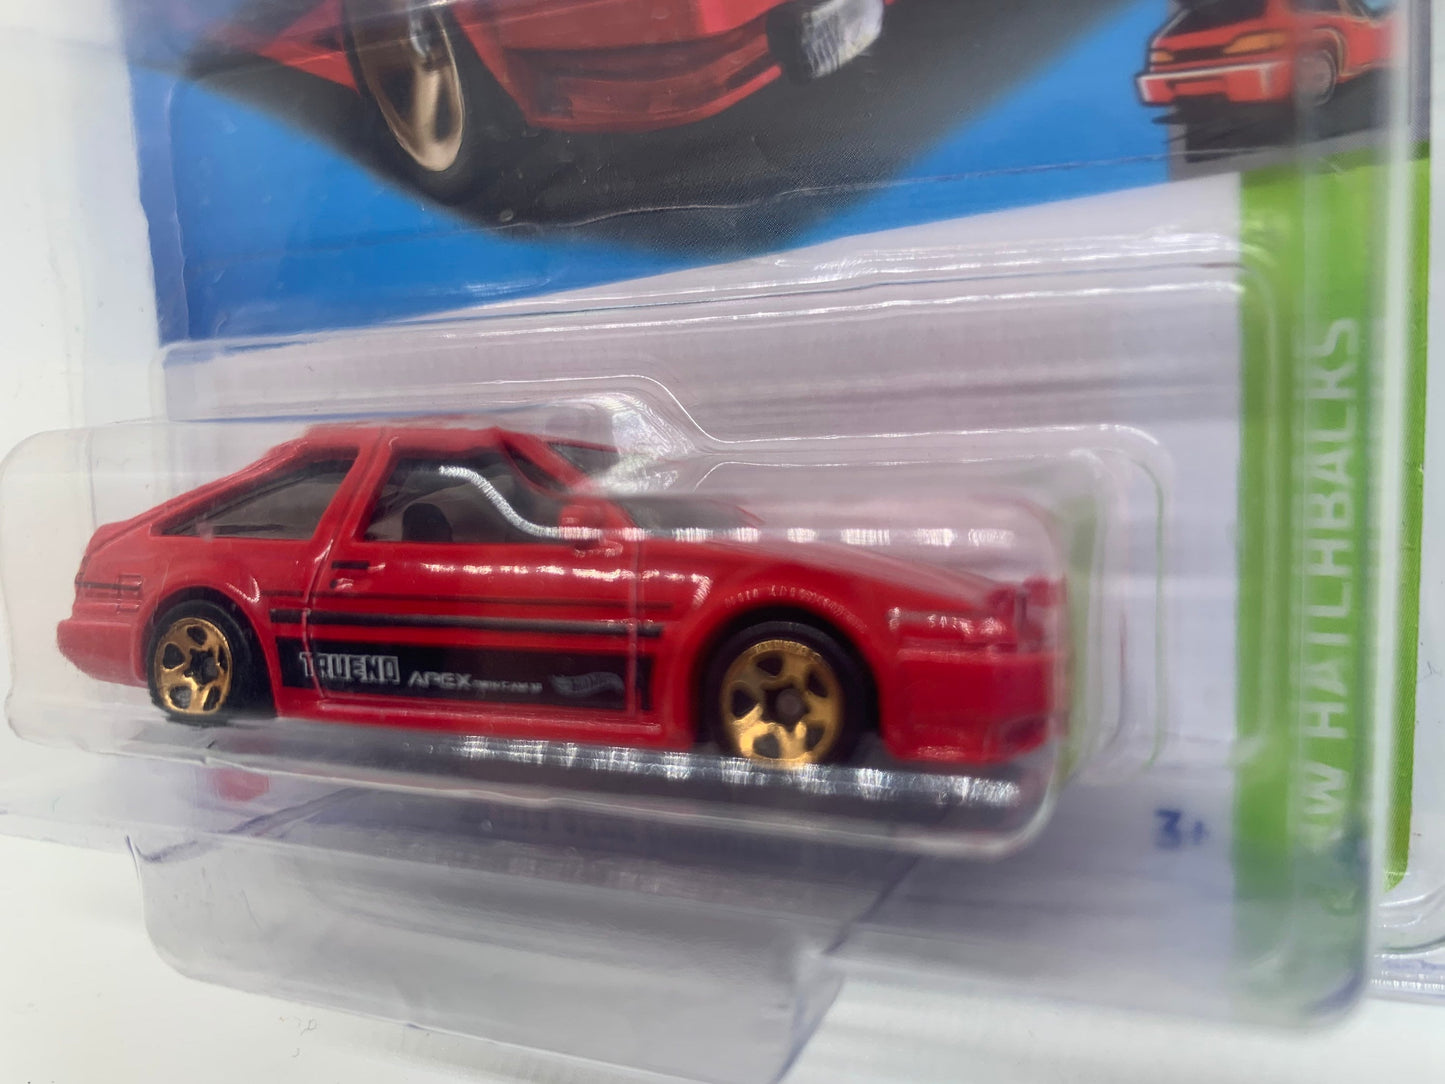 Hot Wheels Toyota AE86 Sprinter Trueno Red HW Hatchbacks Collectable Miniature Scale Model Toy Car Perfect Birthday Gift